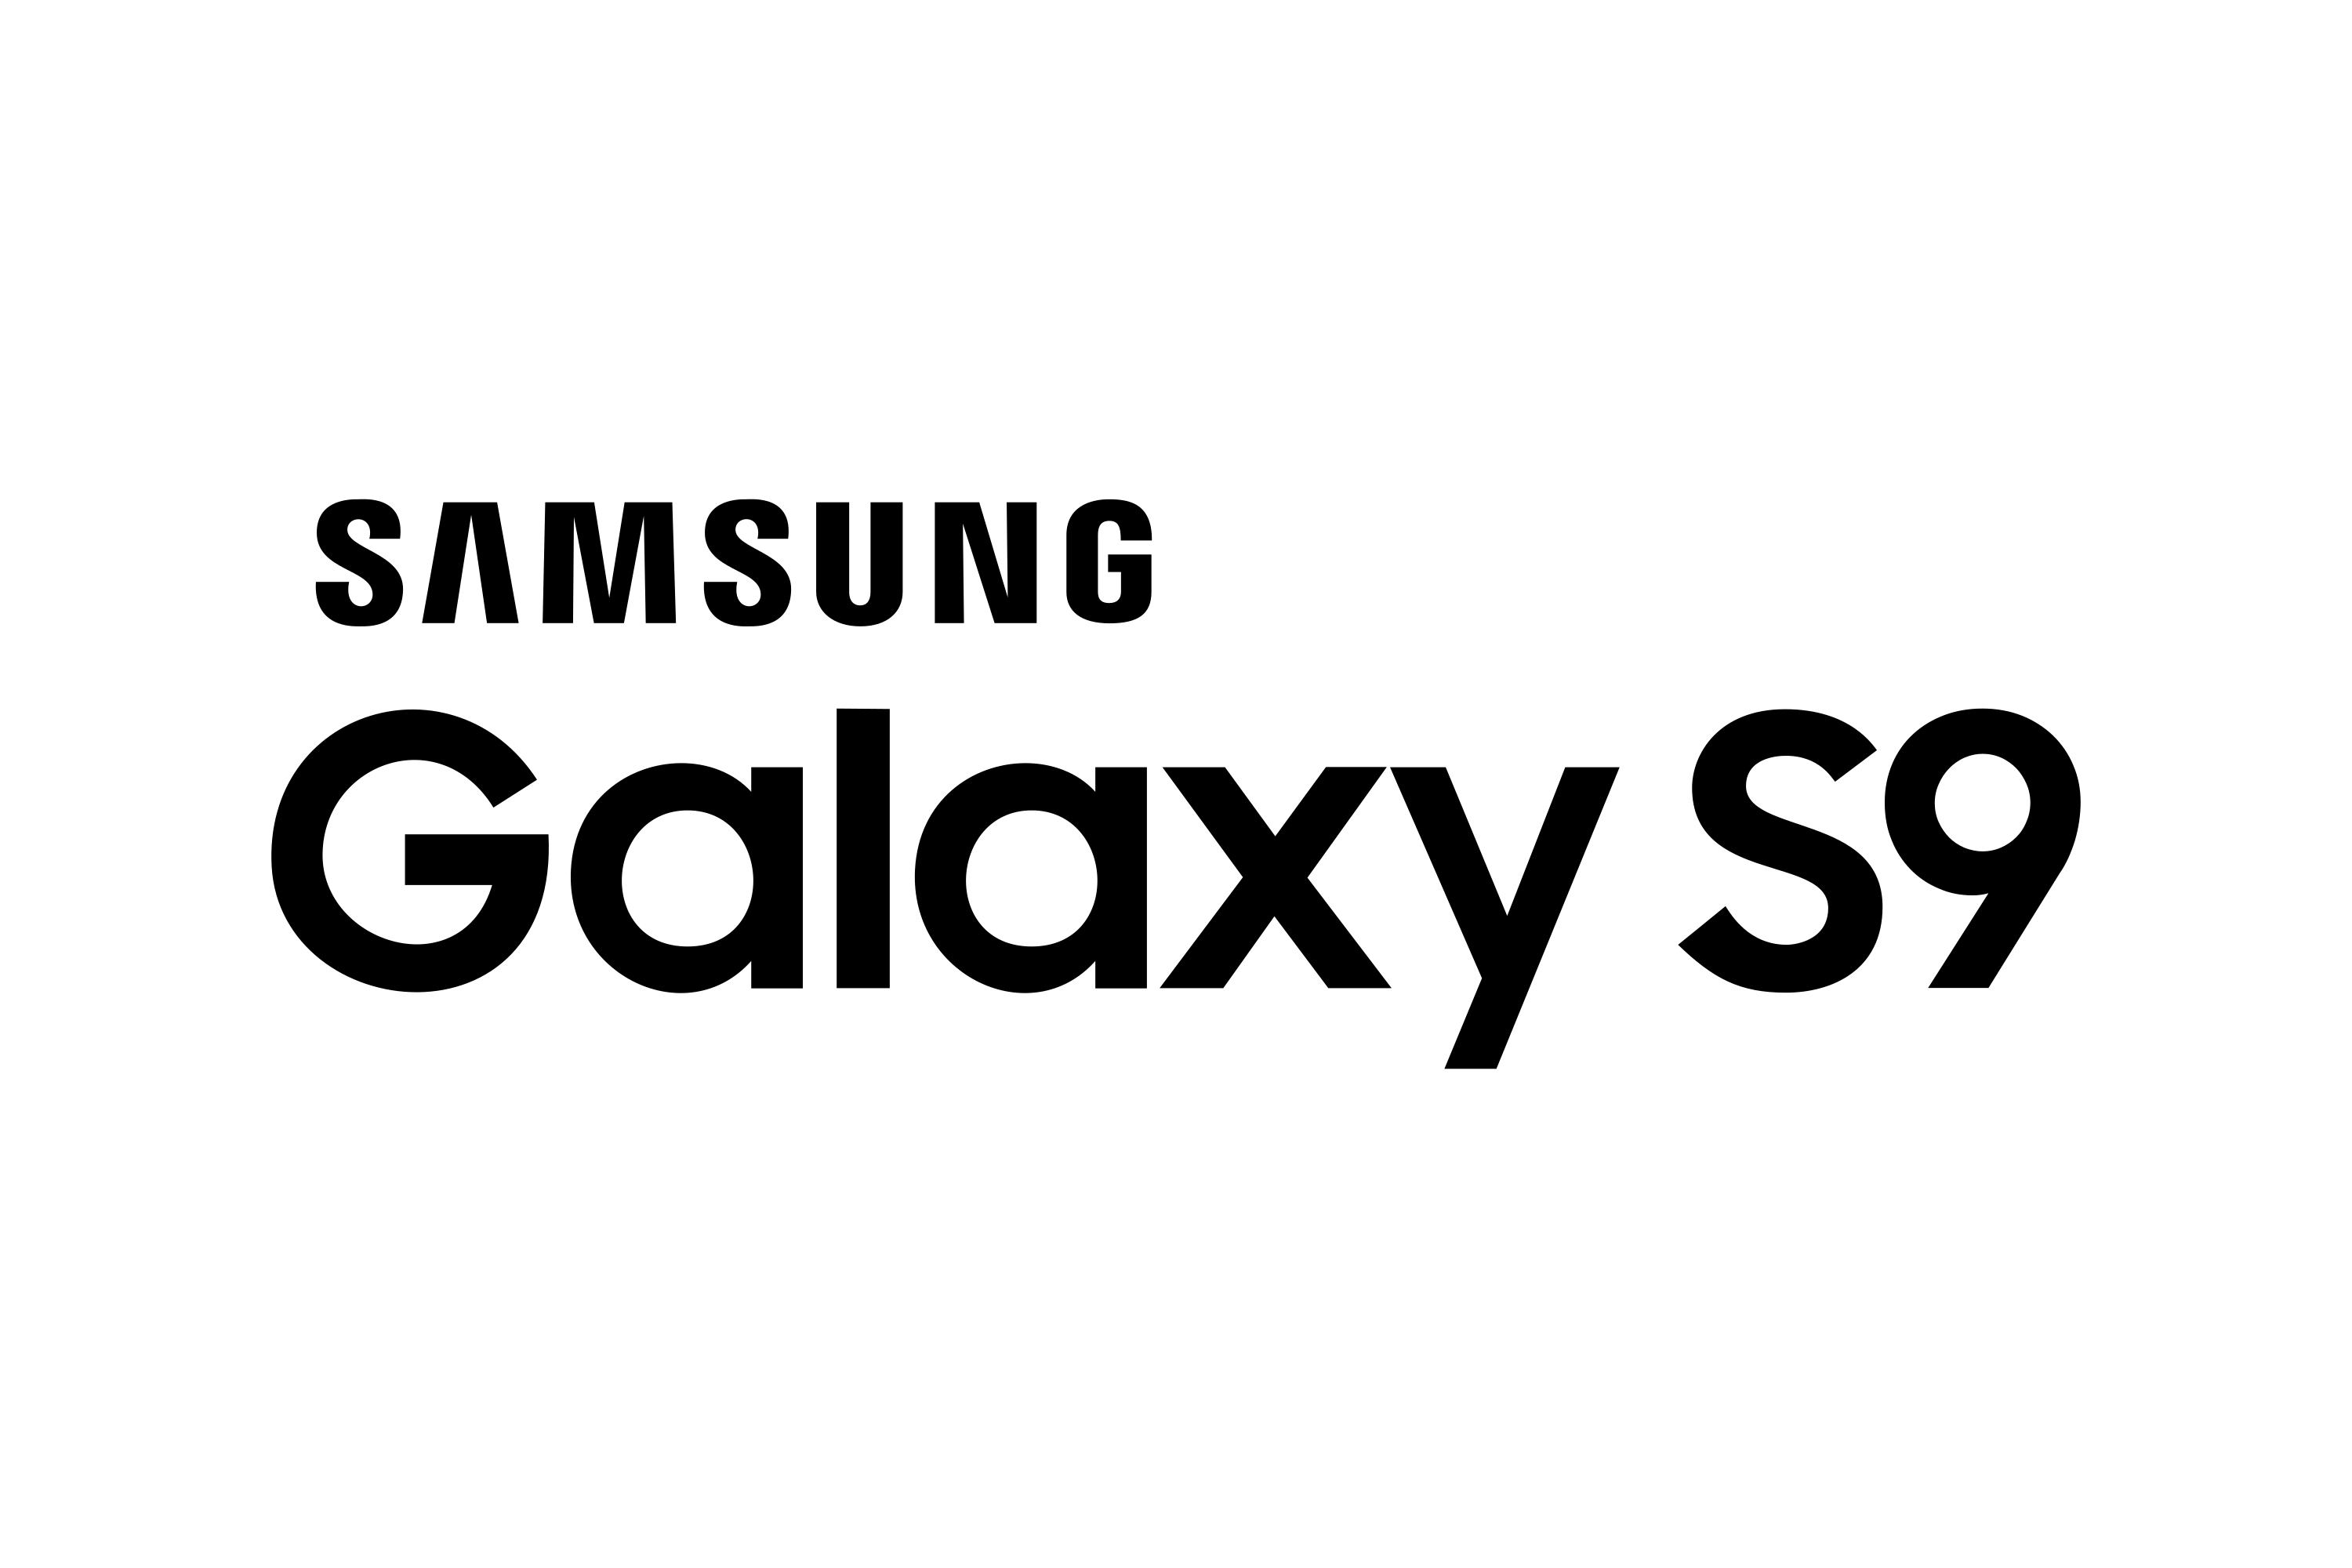 Download Samsung Galaxy S9 Logo in SVG Vector or PNG File Format - Logo